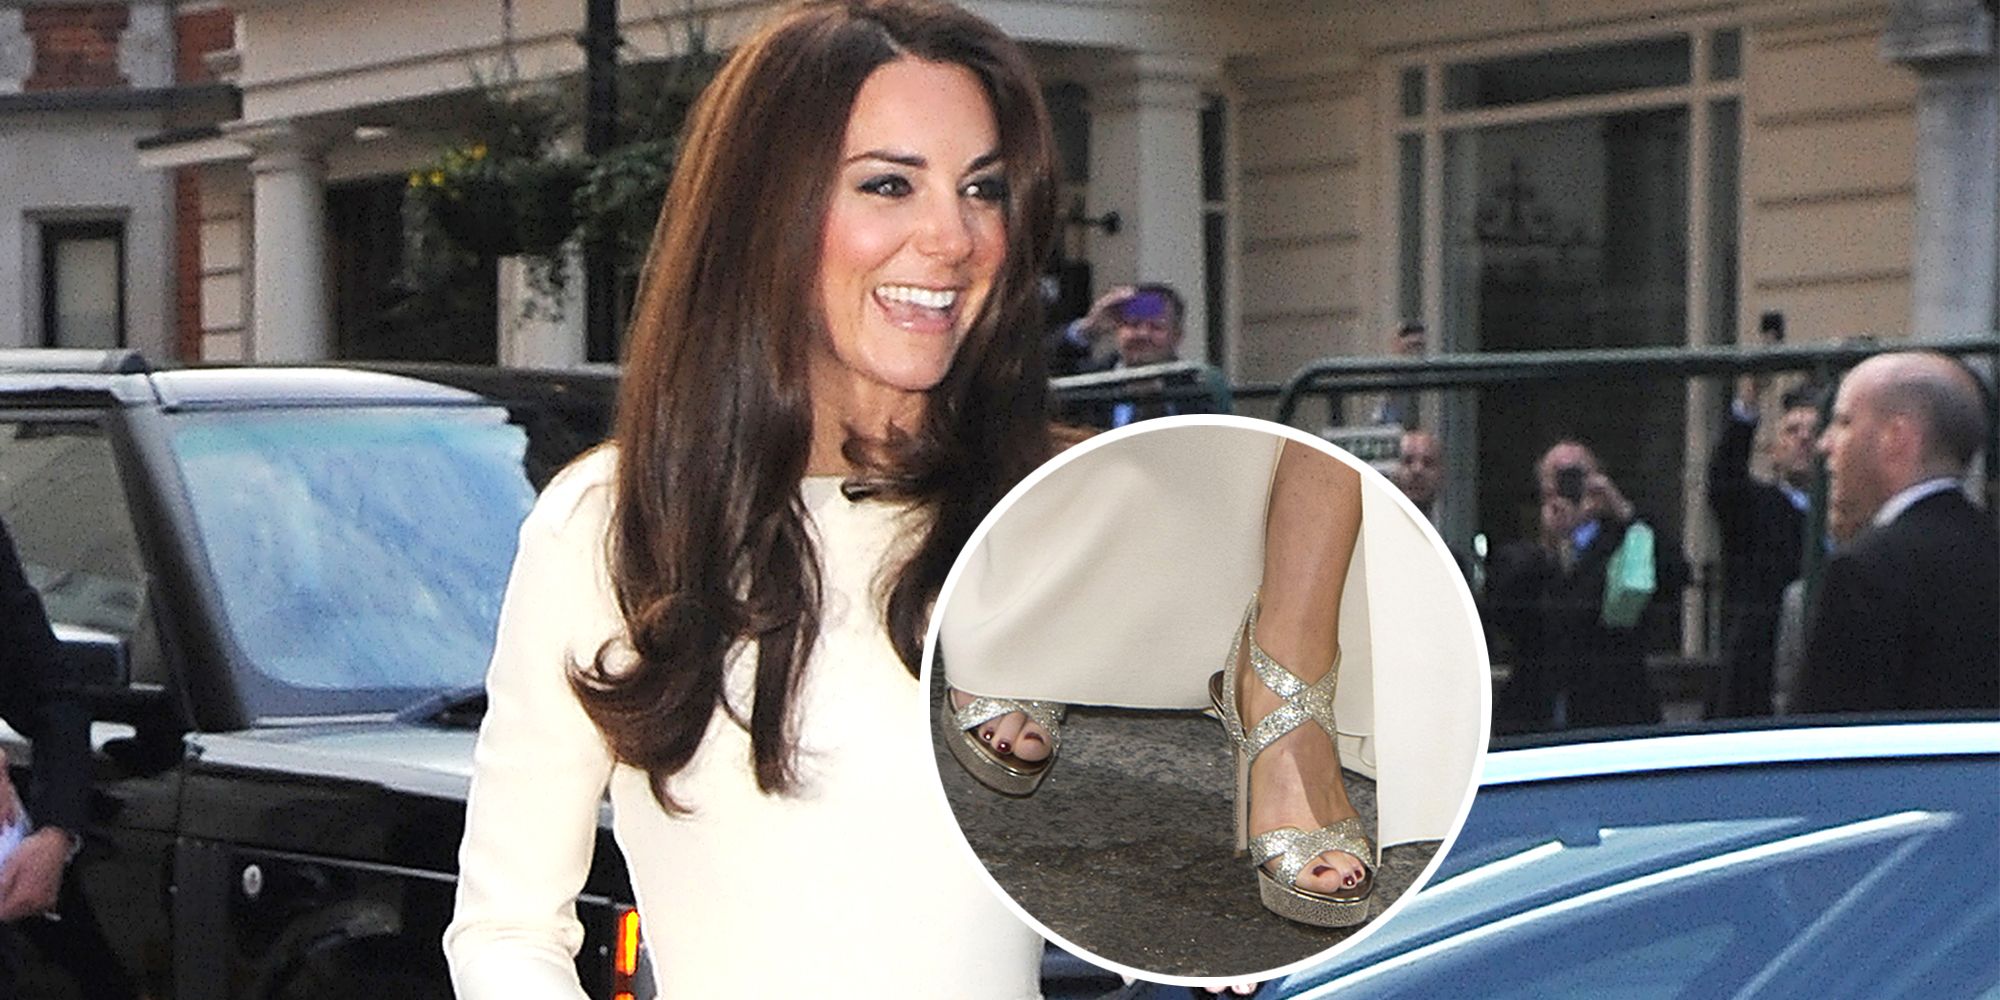 Kate Middleton Has Also Worn Dark Nail Polish and We Barely Noticed ...